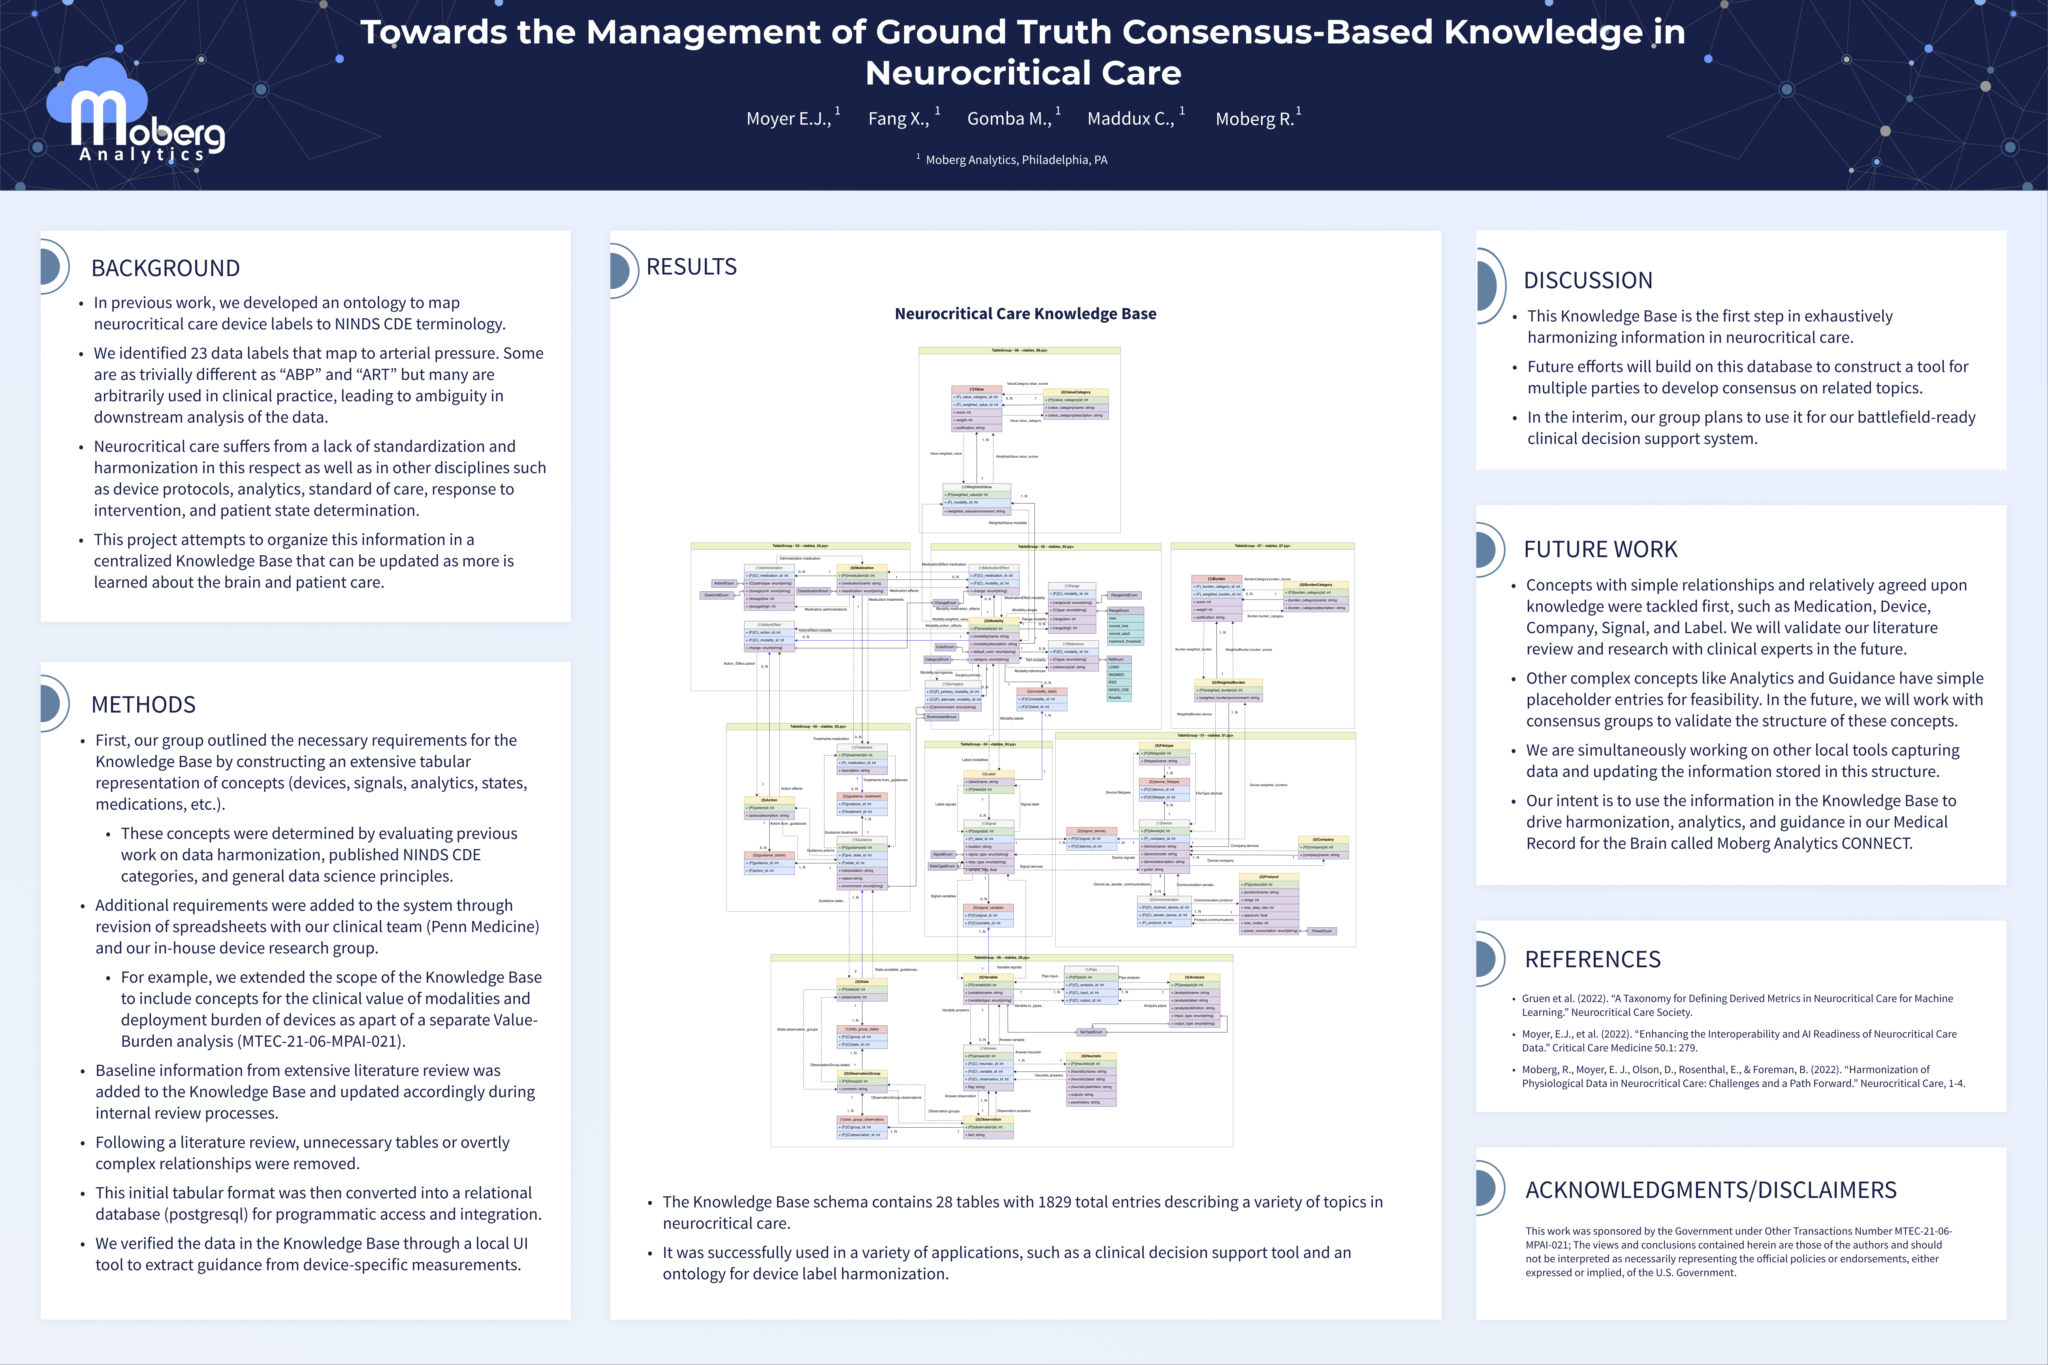 Towards the Management of Ground Truth Consensus-Based Knowledge in Neurocritical Care